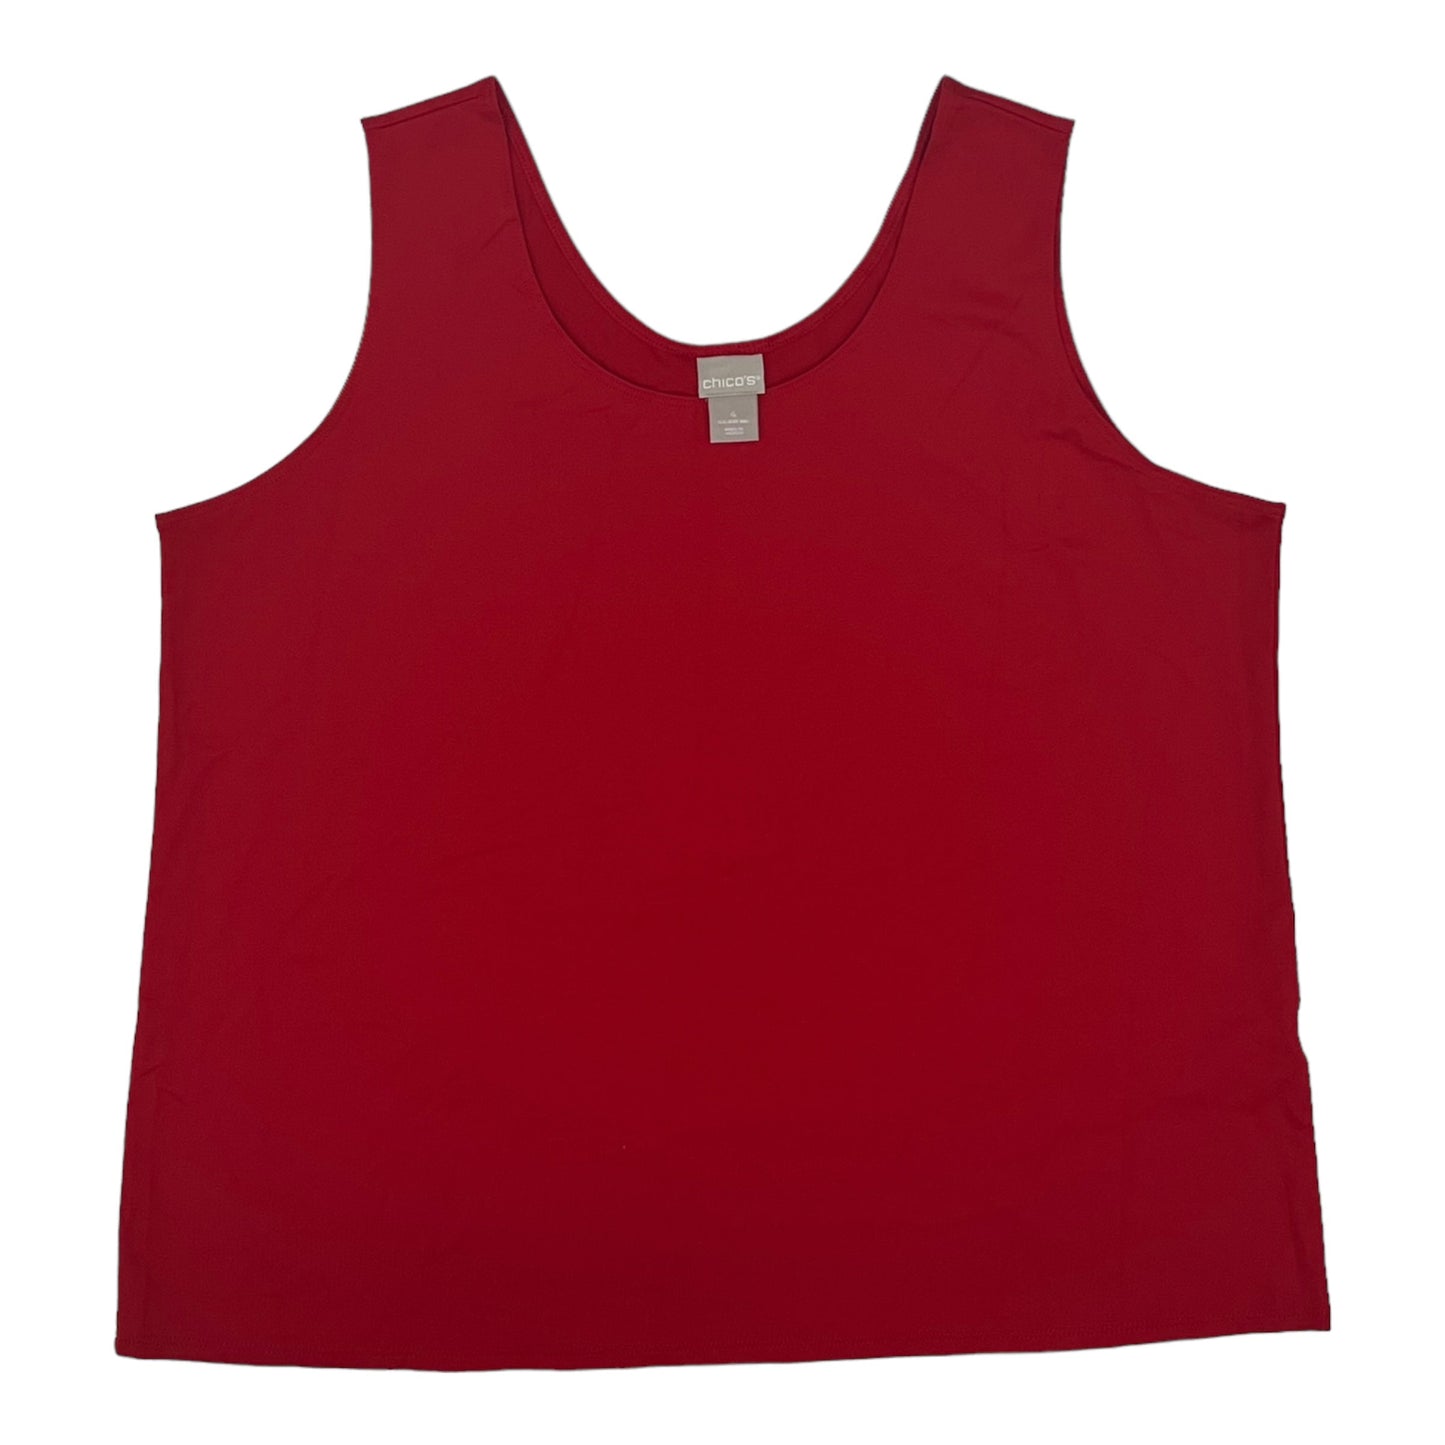 RED CHICOS TANK TOP, Size 2X